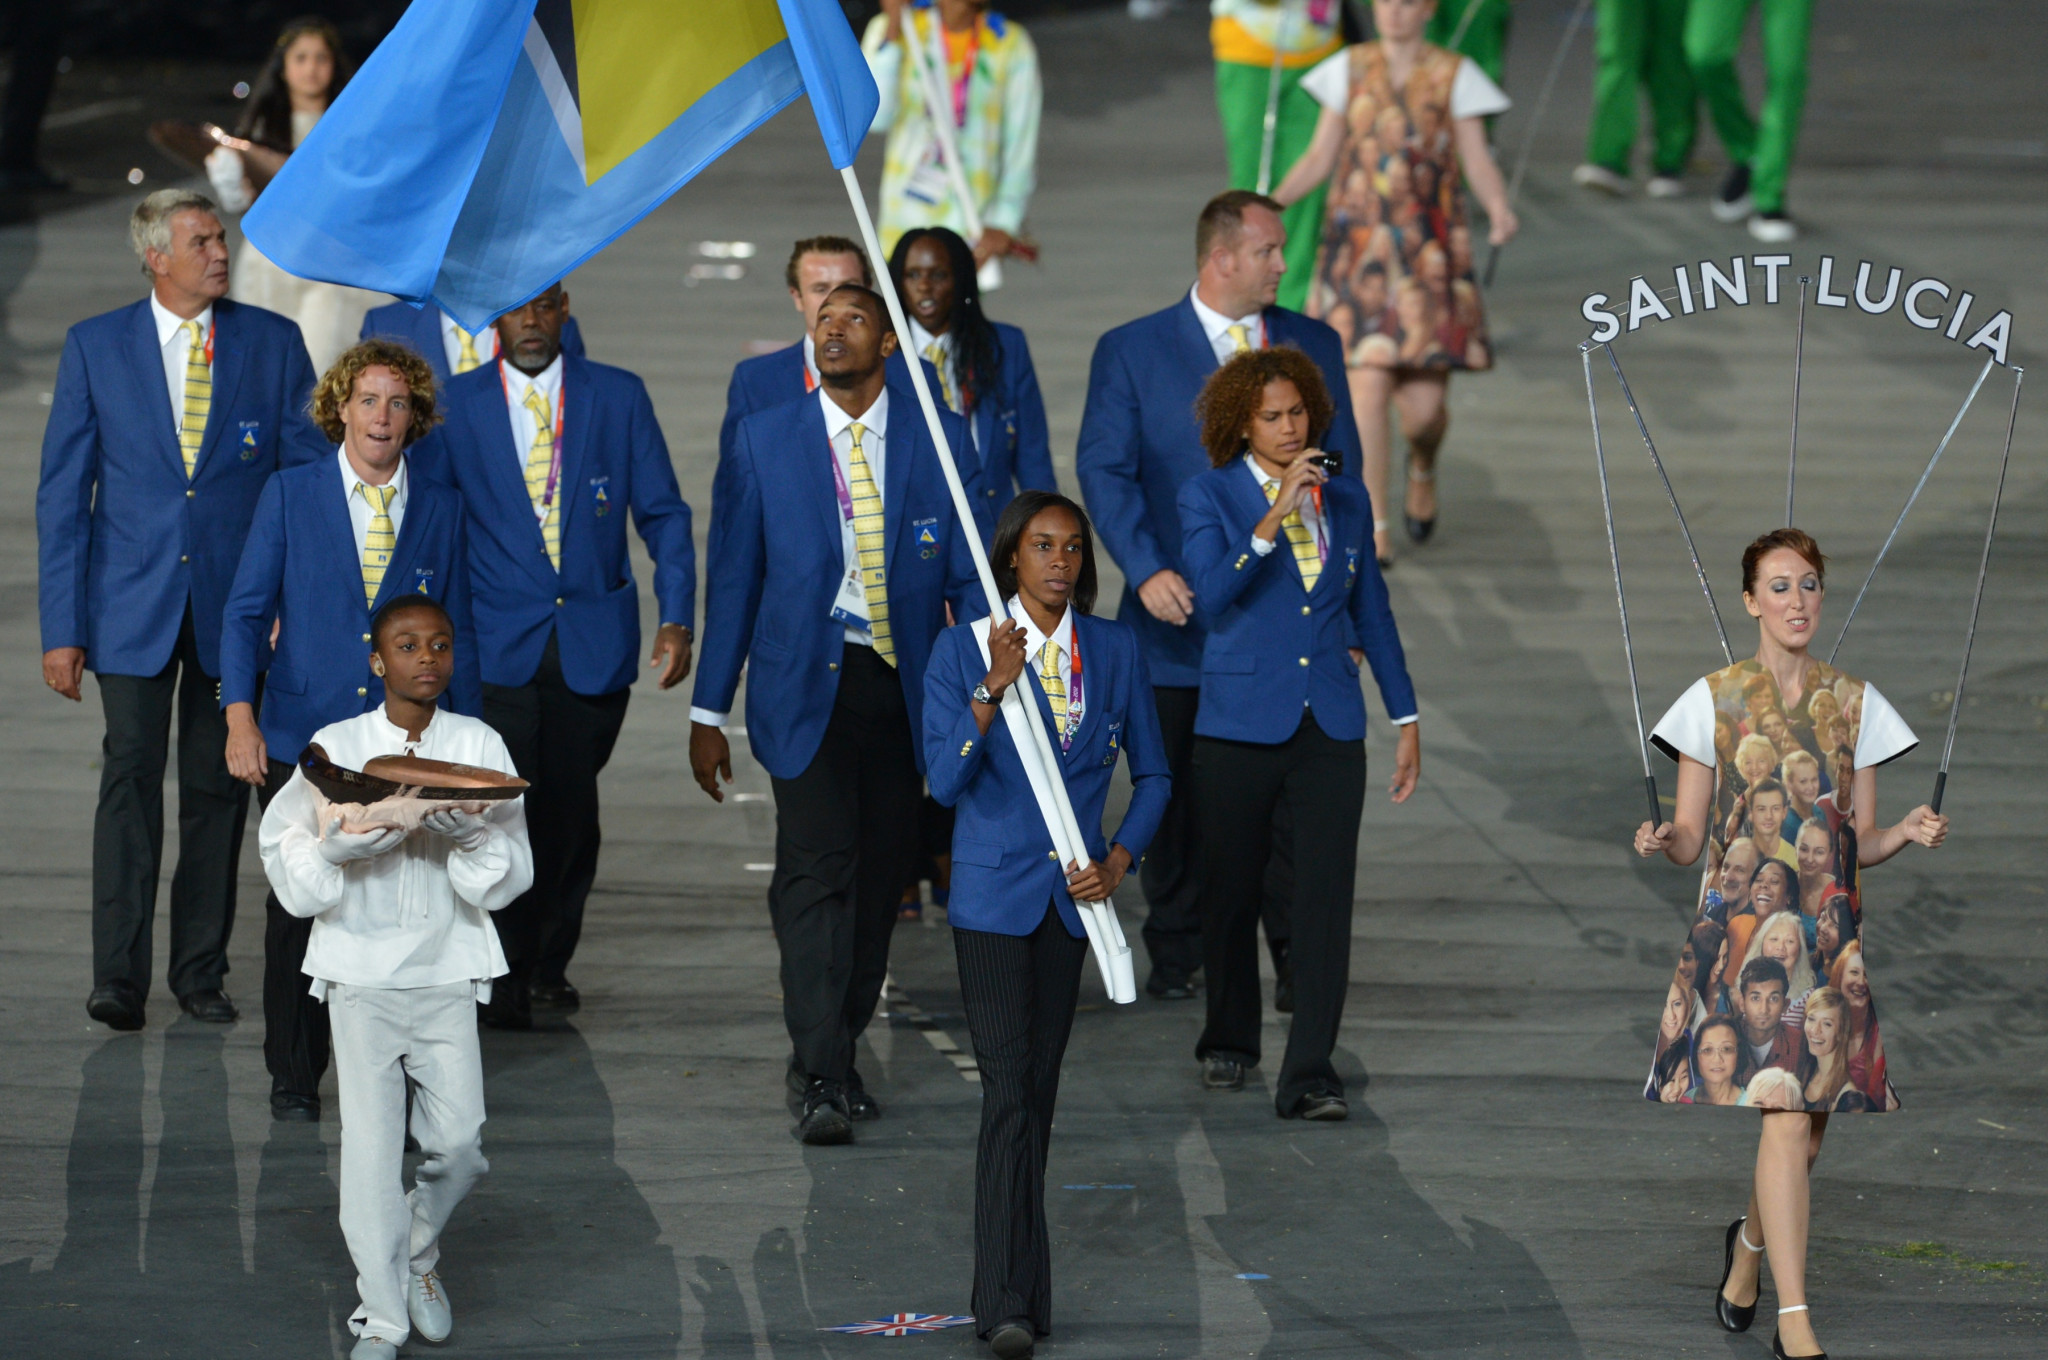 Saint Lucia Olympic Committee approves financial package for three sporting associations